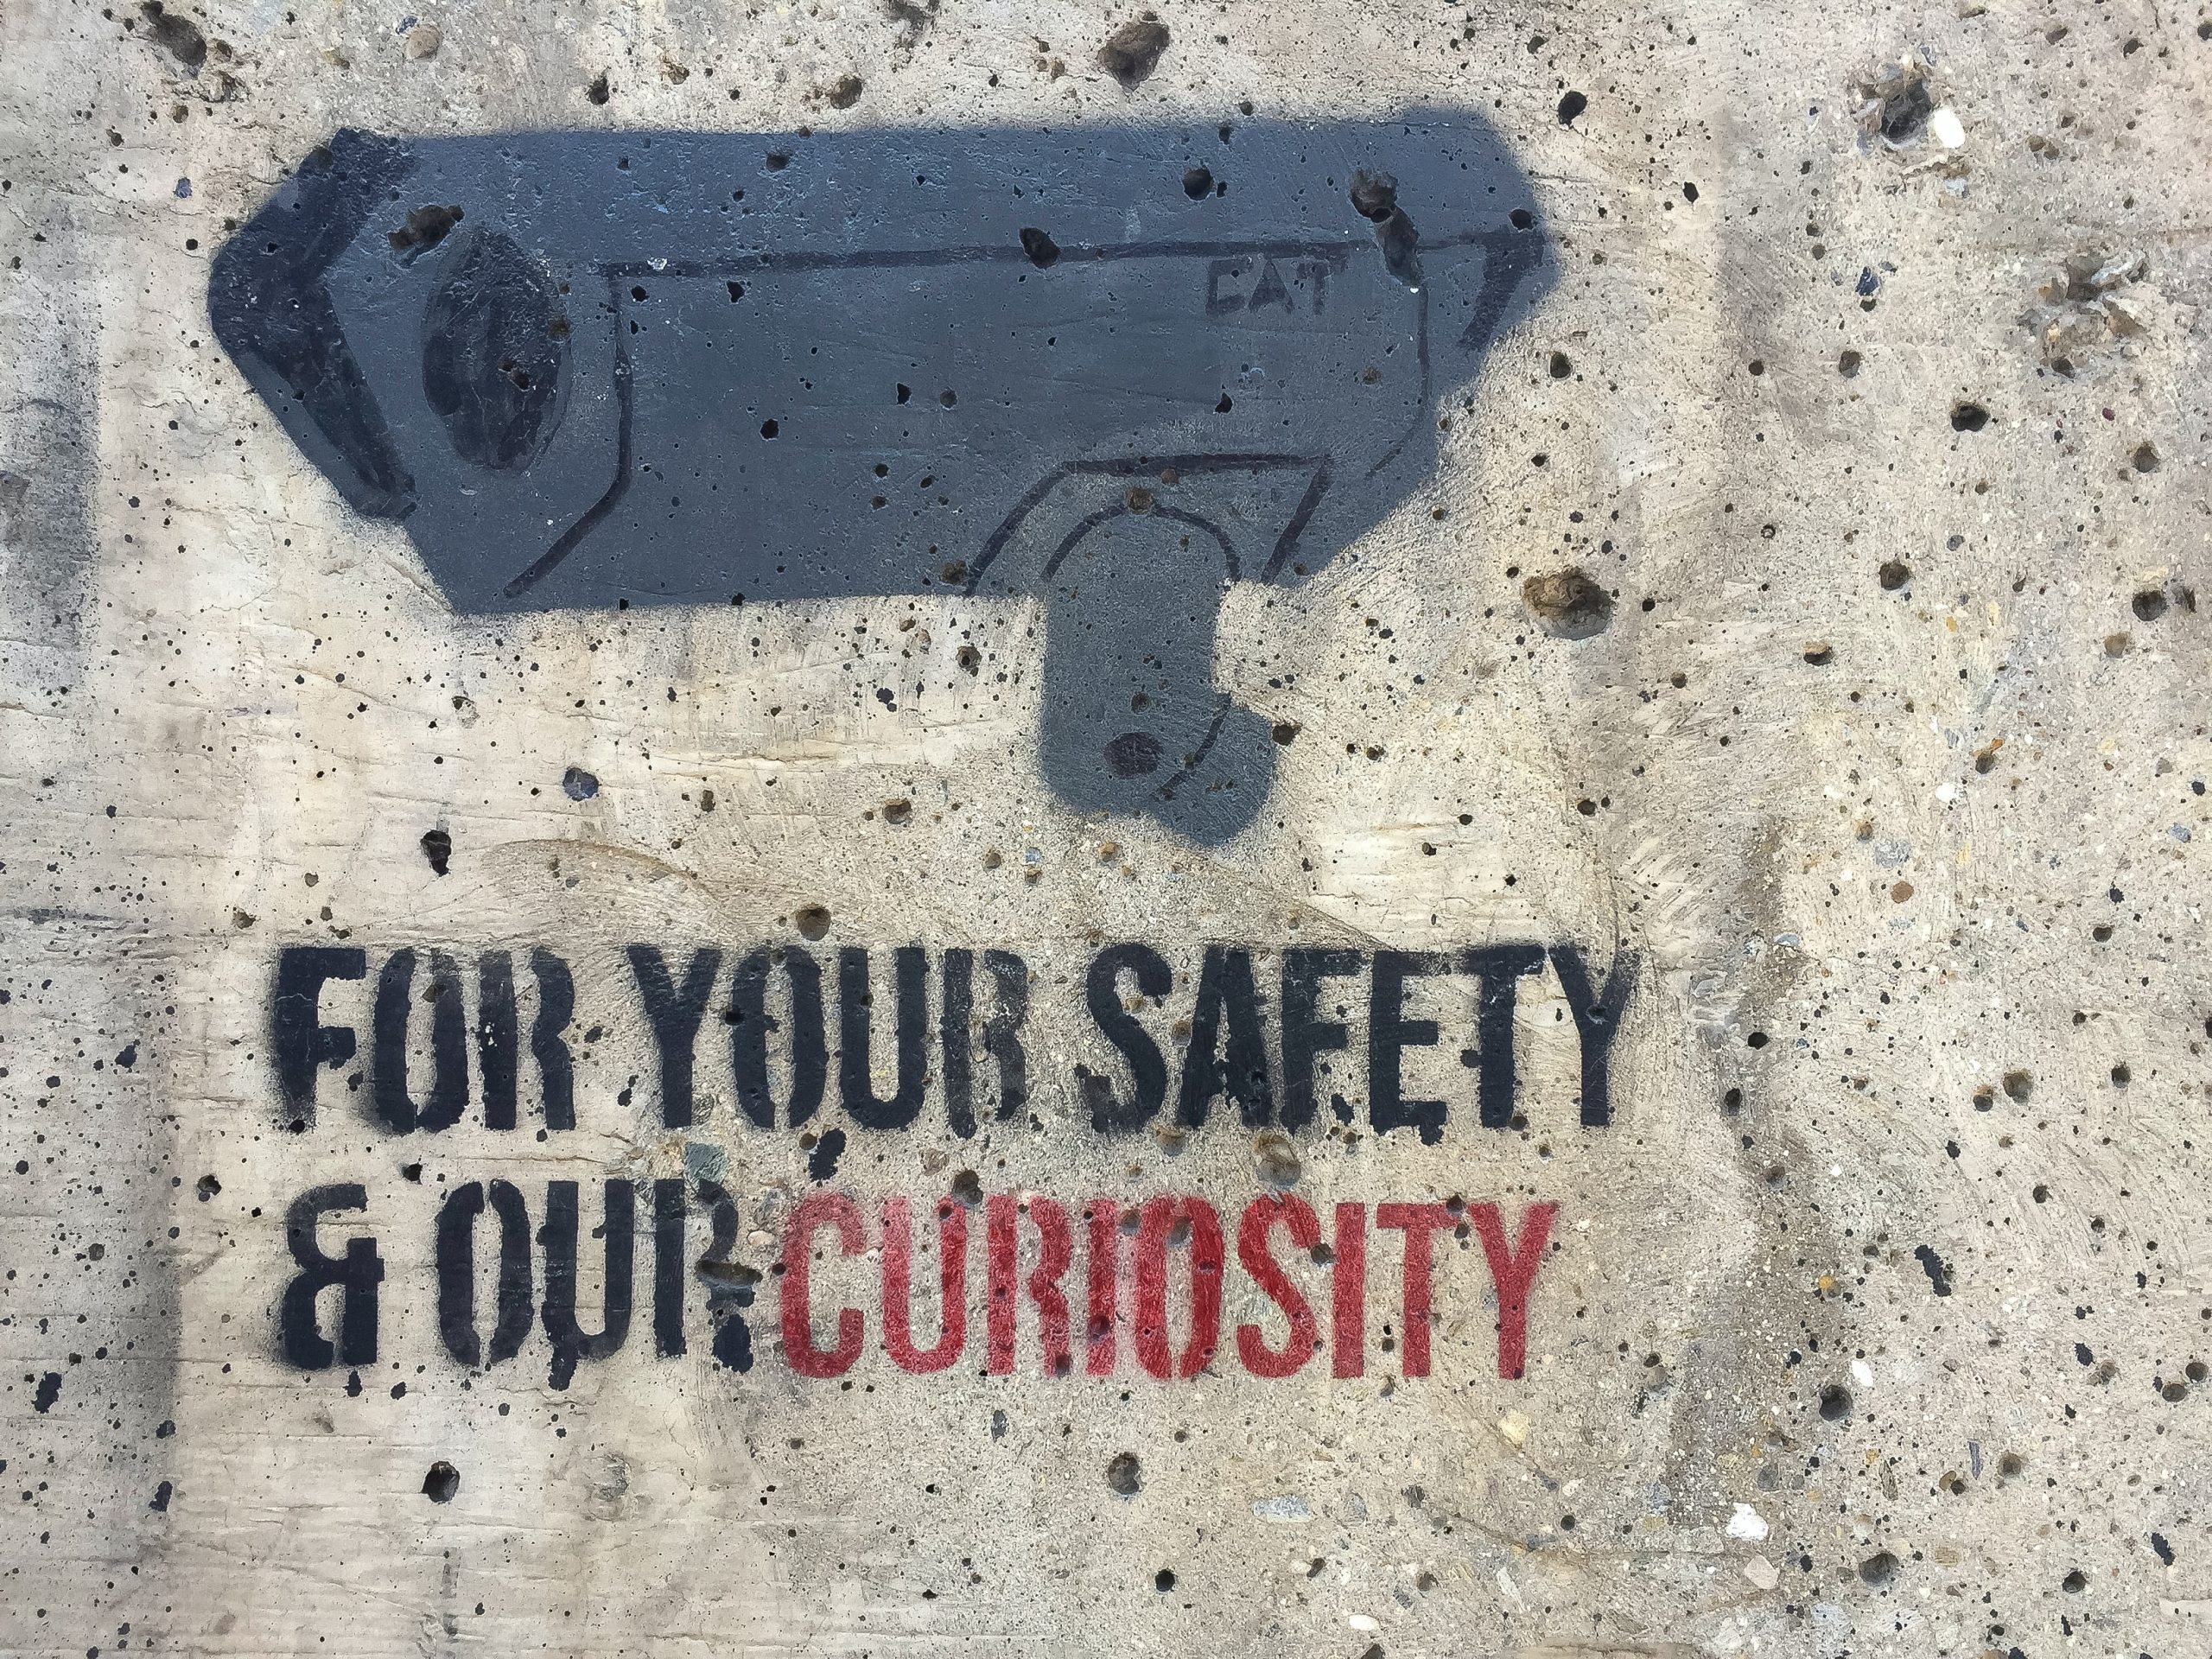 Graffiti on a beige wall shows a grey security camera with the words "for your safety and our curiosity" underneath